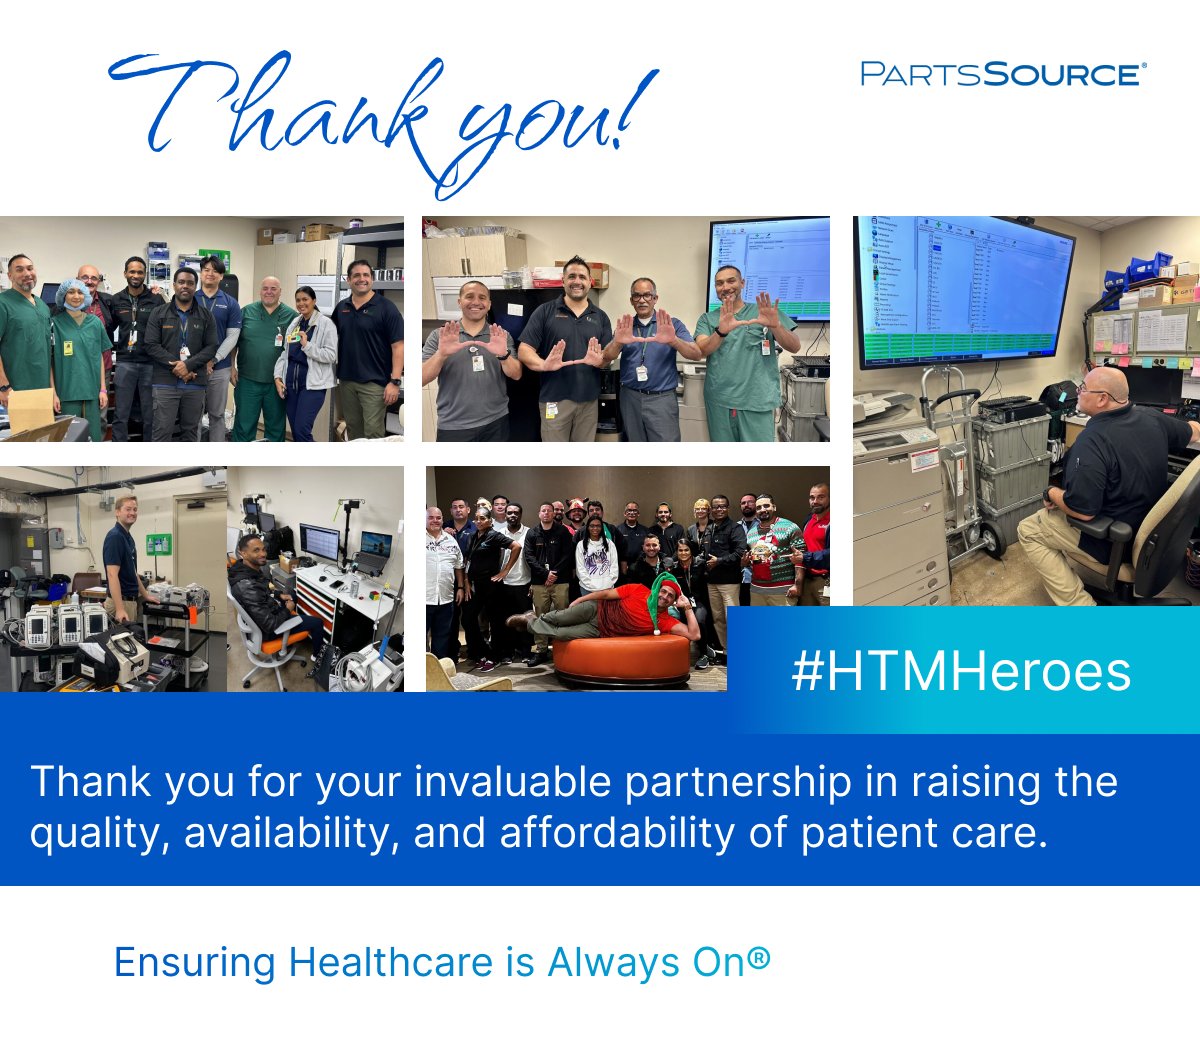 In celebration of #HTMWeek, we'd like to take the time to thank our amazing HTM partners. Today we recognize the HTM heroes from @UMiamiHealth. Their incredible work helps ensure that healthcare is always on! #healthcaretechnology #iamhtm #HTMHeroes